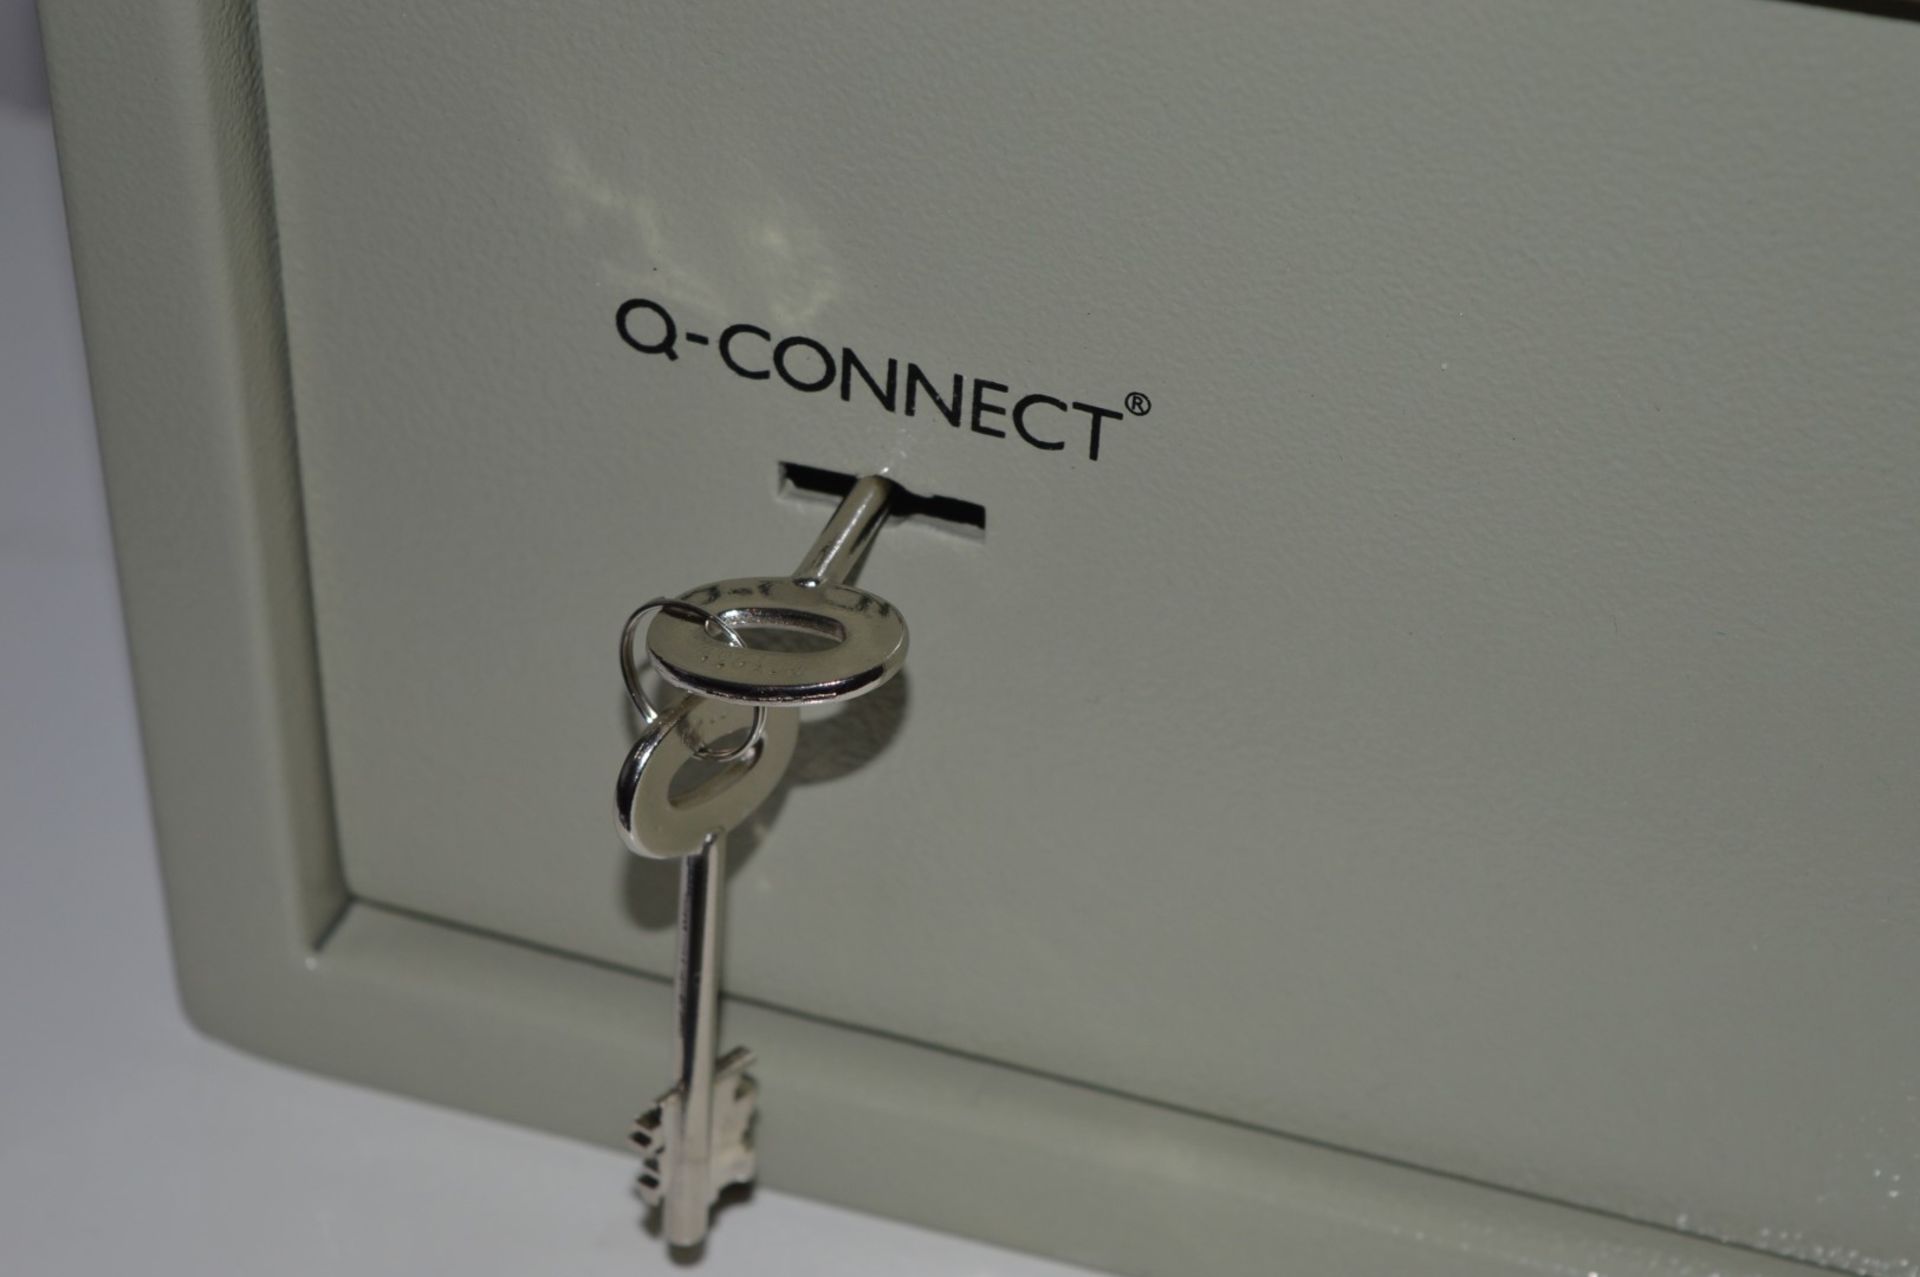 1 x Q-Connect Compact Key Operated Safe - 6 Litre Capacity - H150 x W200 x D200mm - Includes 2 - Image 2 of 5